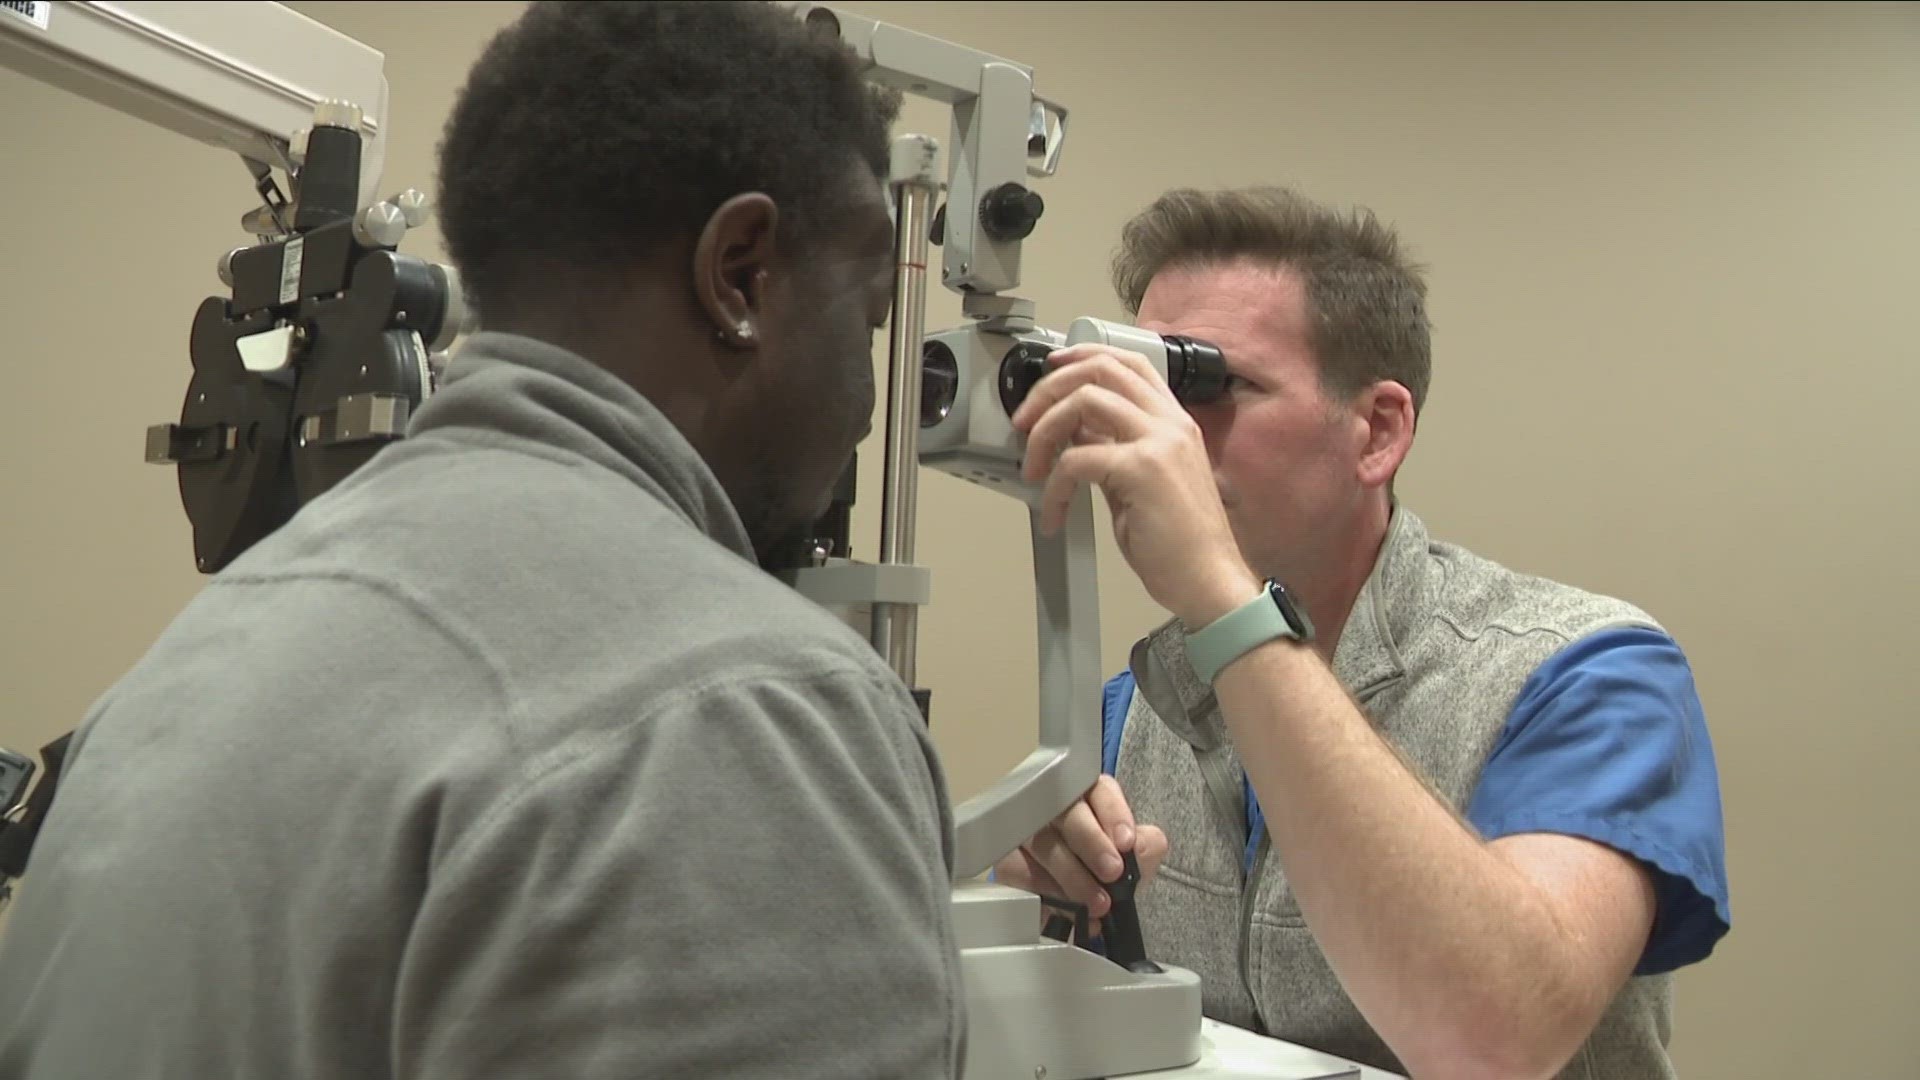 2 On Your Side stopped by the UBMD Ophthalmology Ross Eye Institute on Main Street before it wrapped up Monday night to find out what symptoms to look out for.